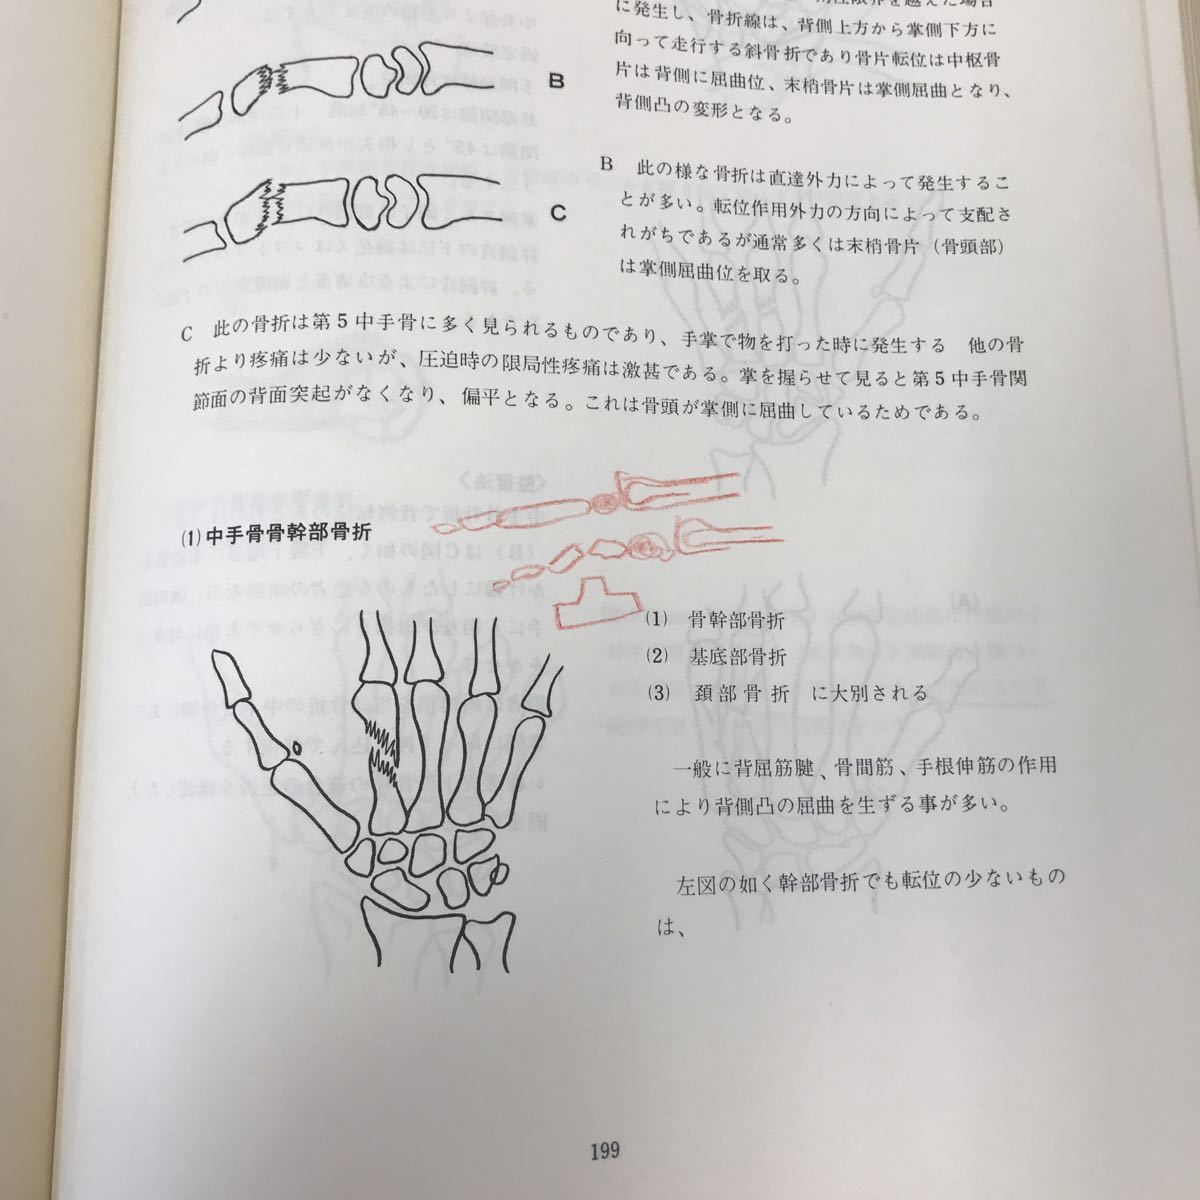 A54-032 整骨学 社団法人 日本柔道整復師会 学術委員会編 書き込み多数有り 背表紙、破れ有り文字が薄くなってます。_画像6